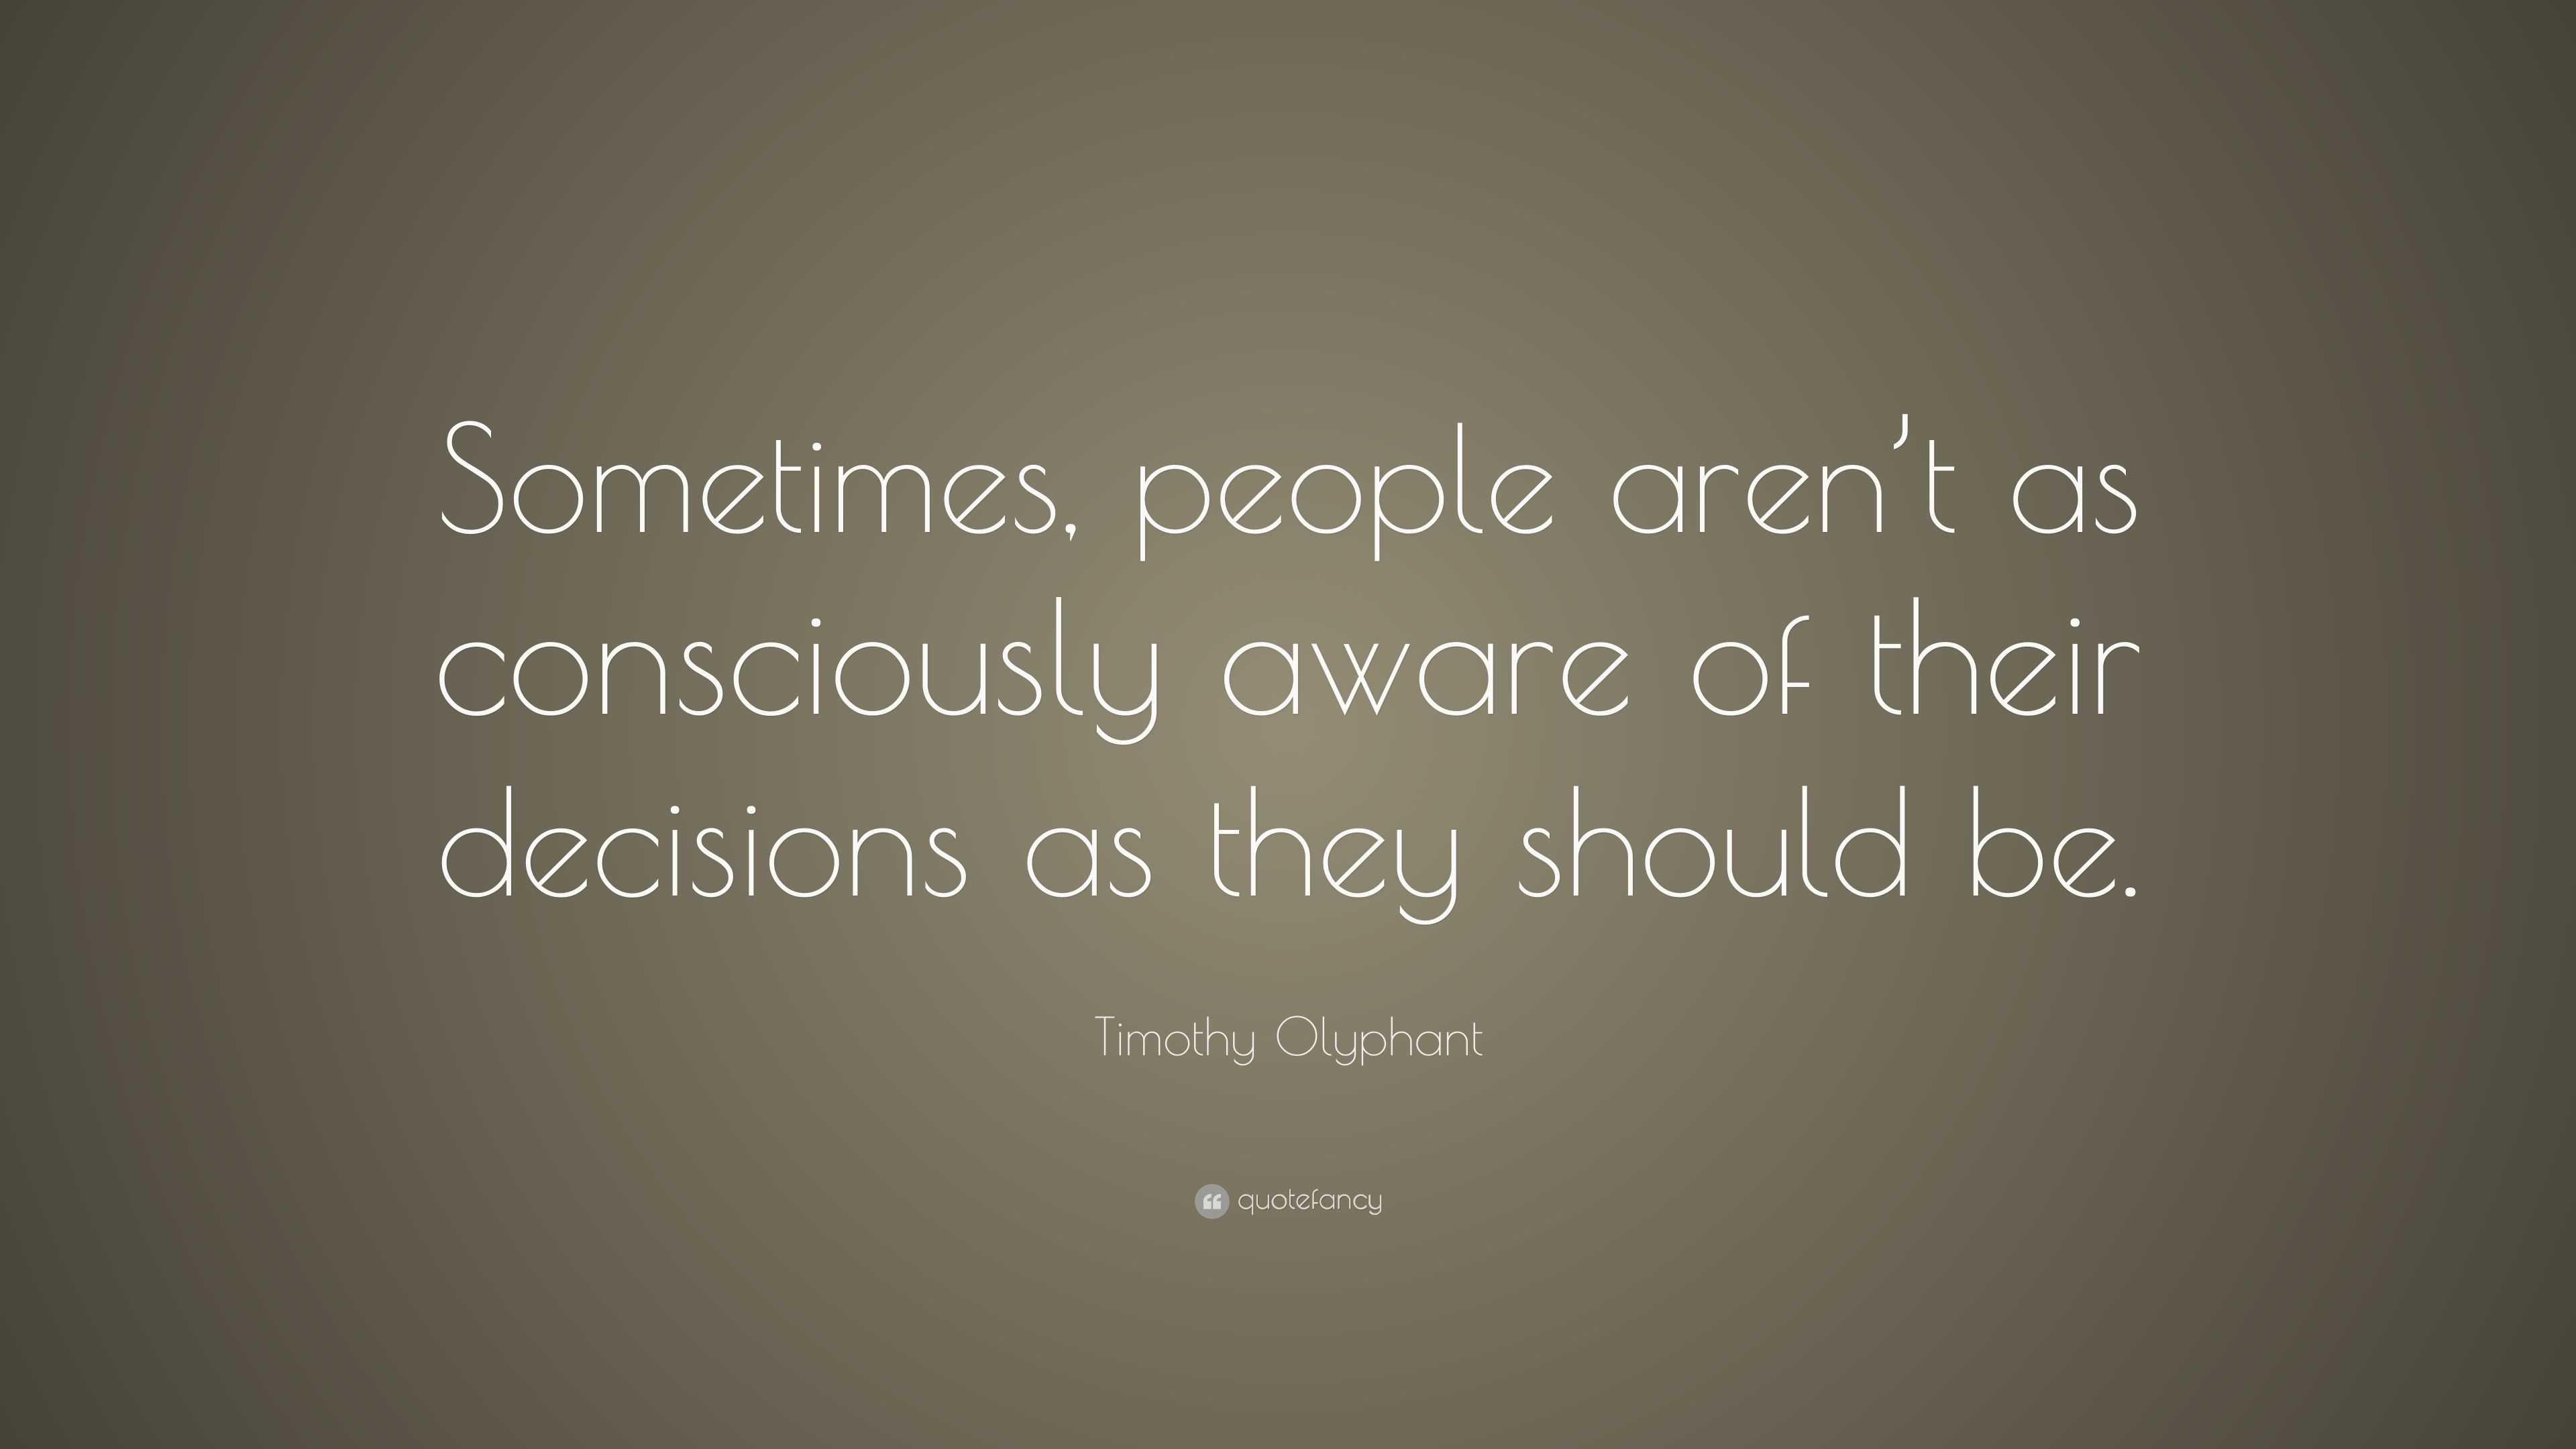 Timothy Olyphant Quote: “Sometimes, people aren’t as consciously aware ...